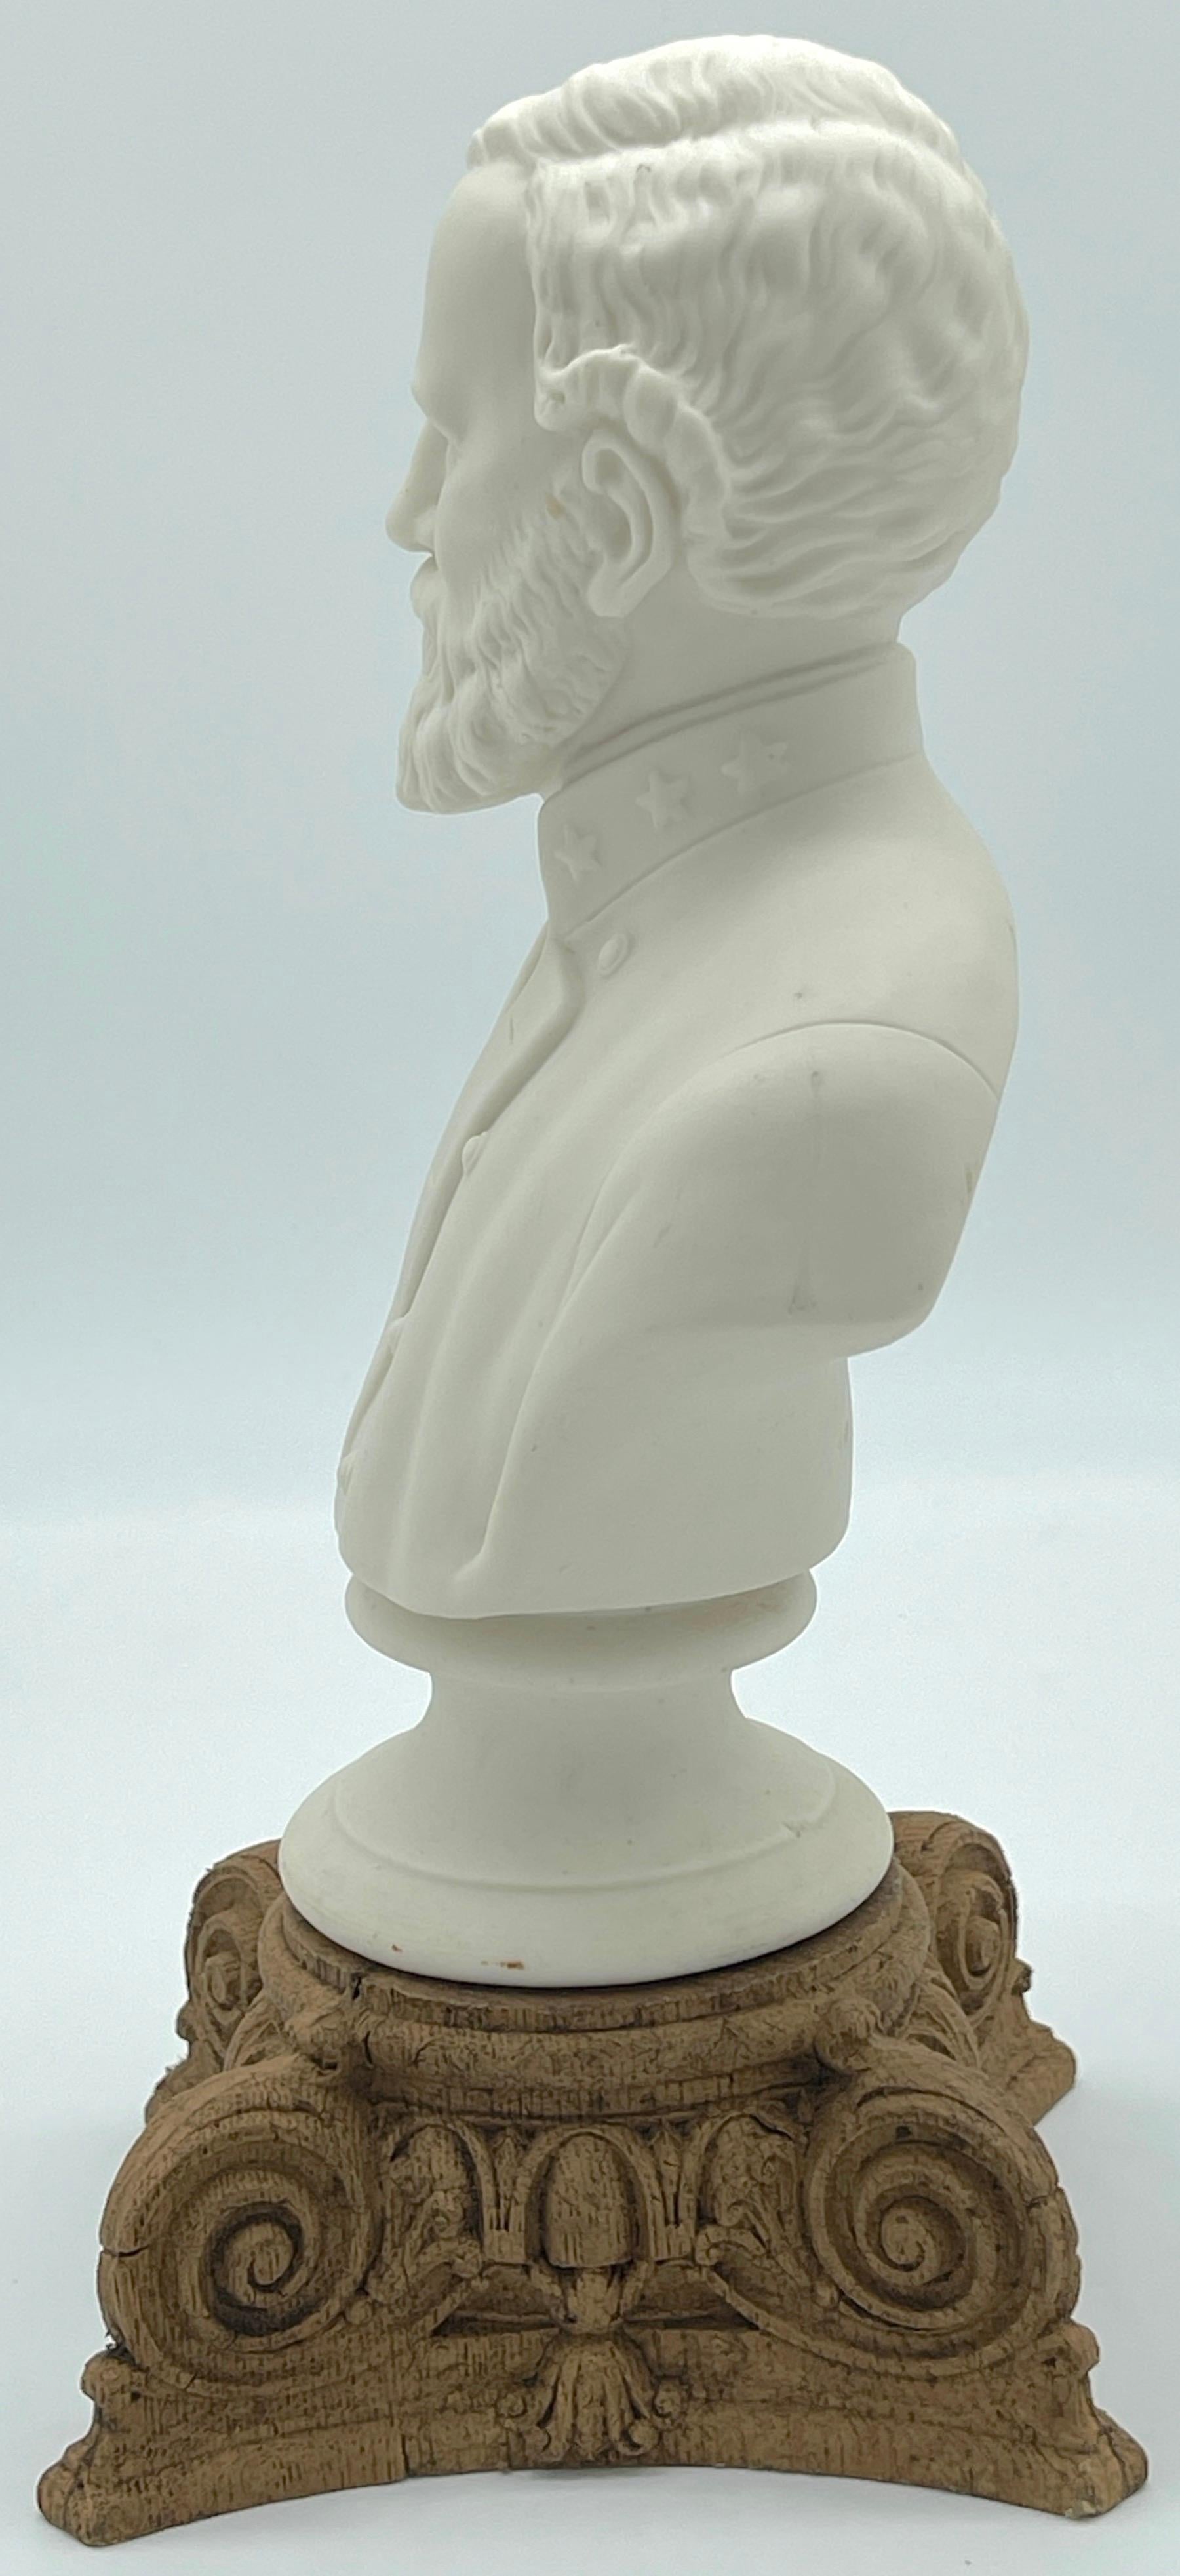 19th Century Parian Bust of Confederate General Robert E. Lee on Carved Neoclassical Base